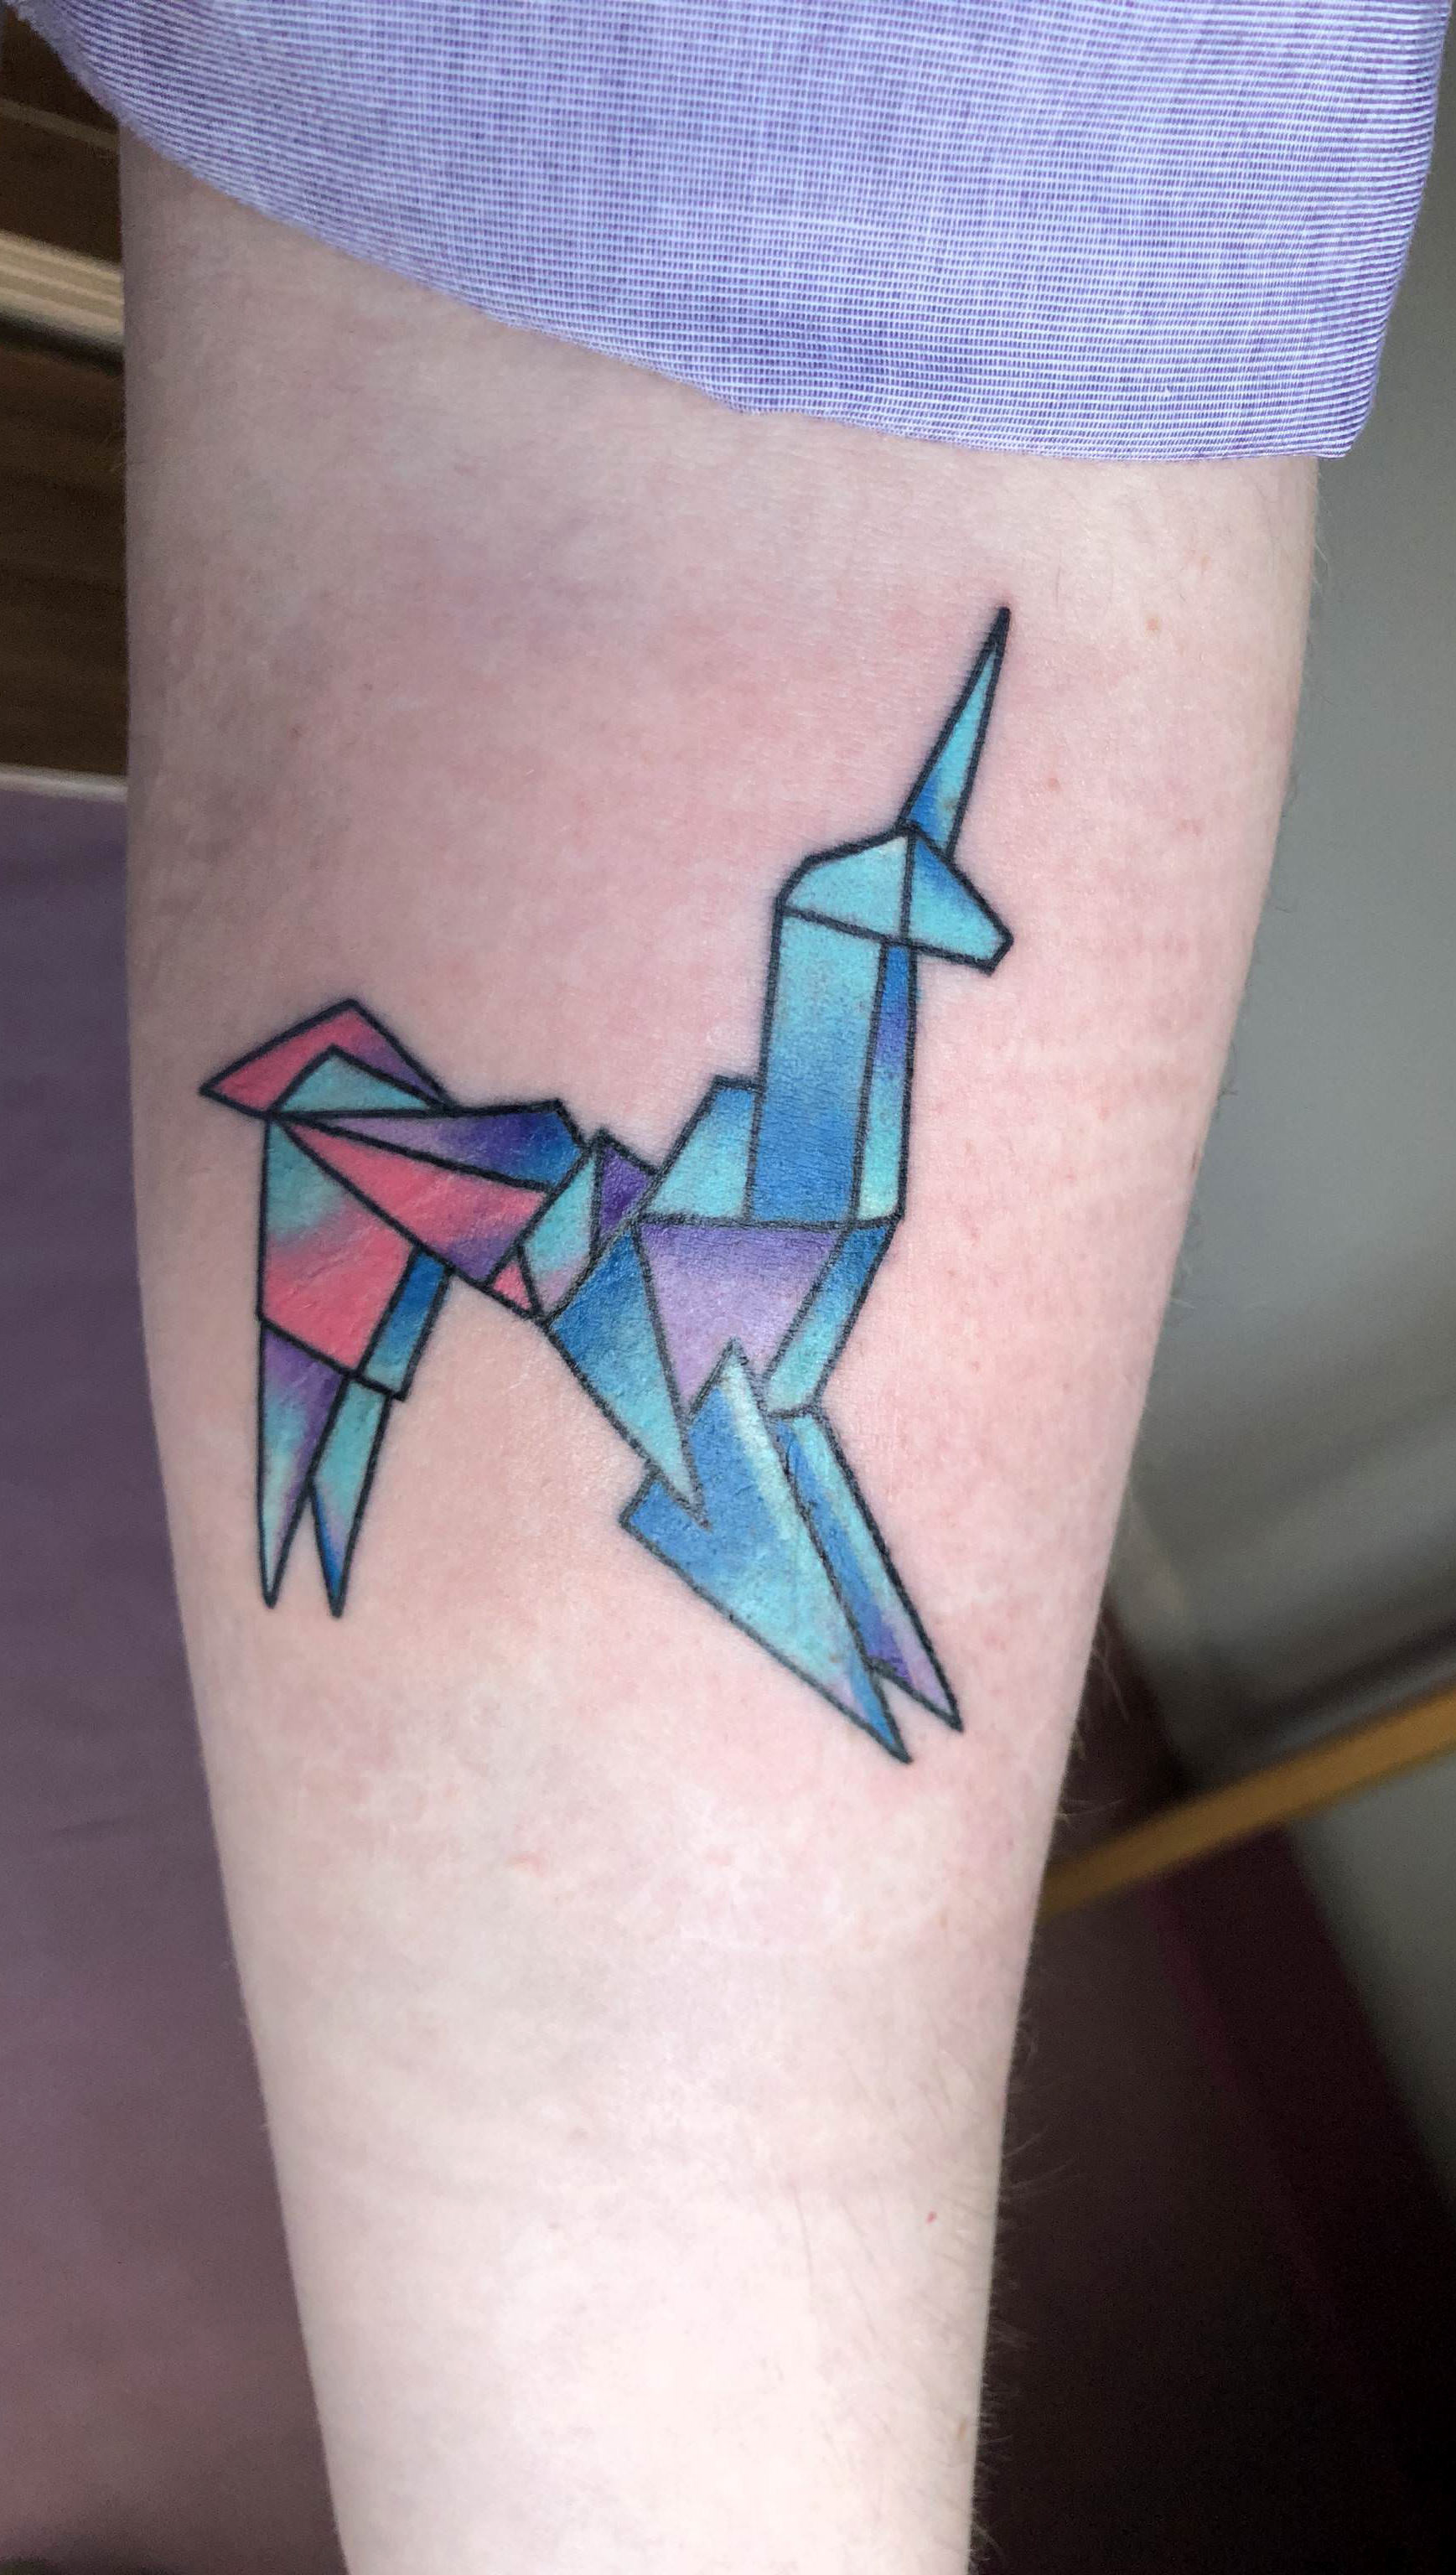 Buy Small Unicorn Tattoo Online In India - Etsy India